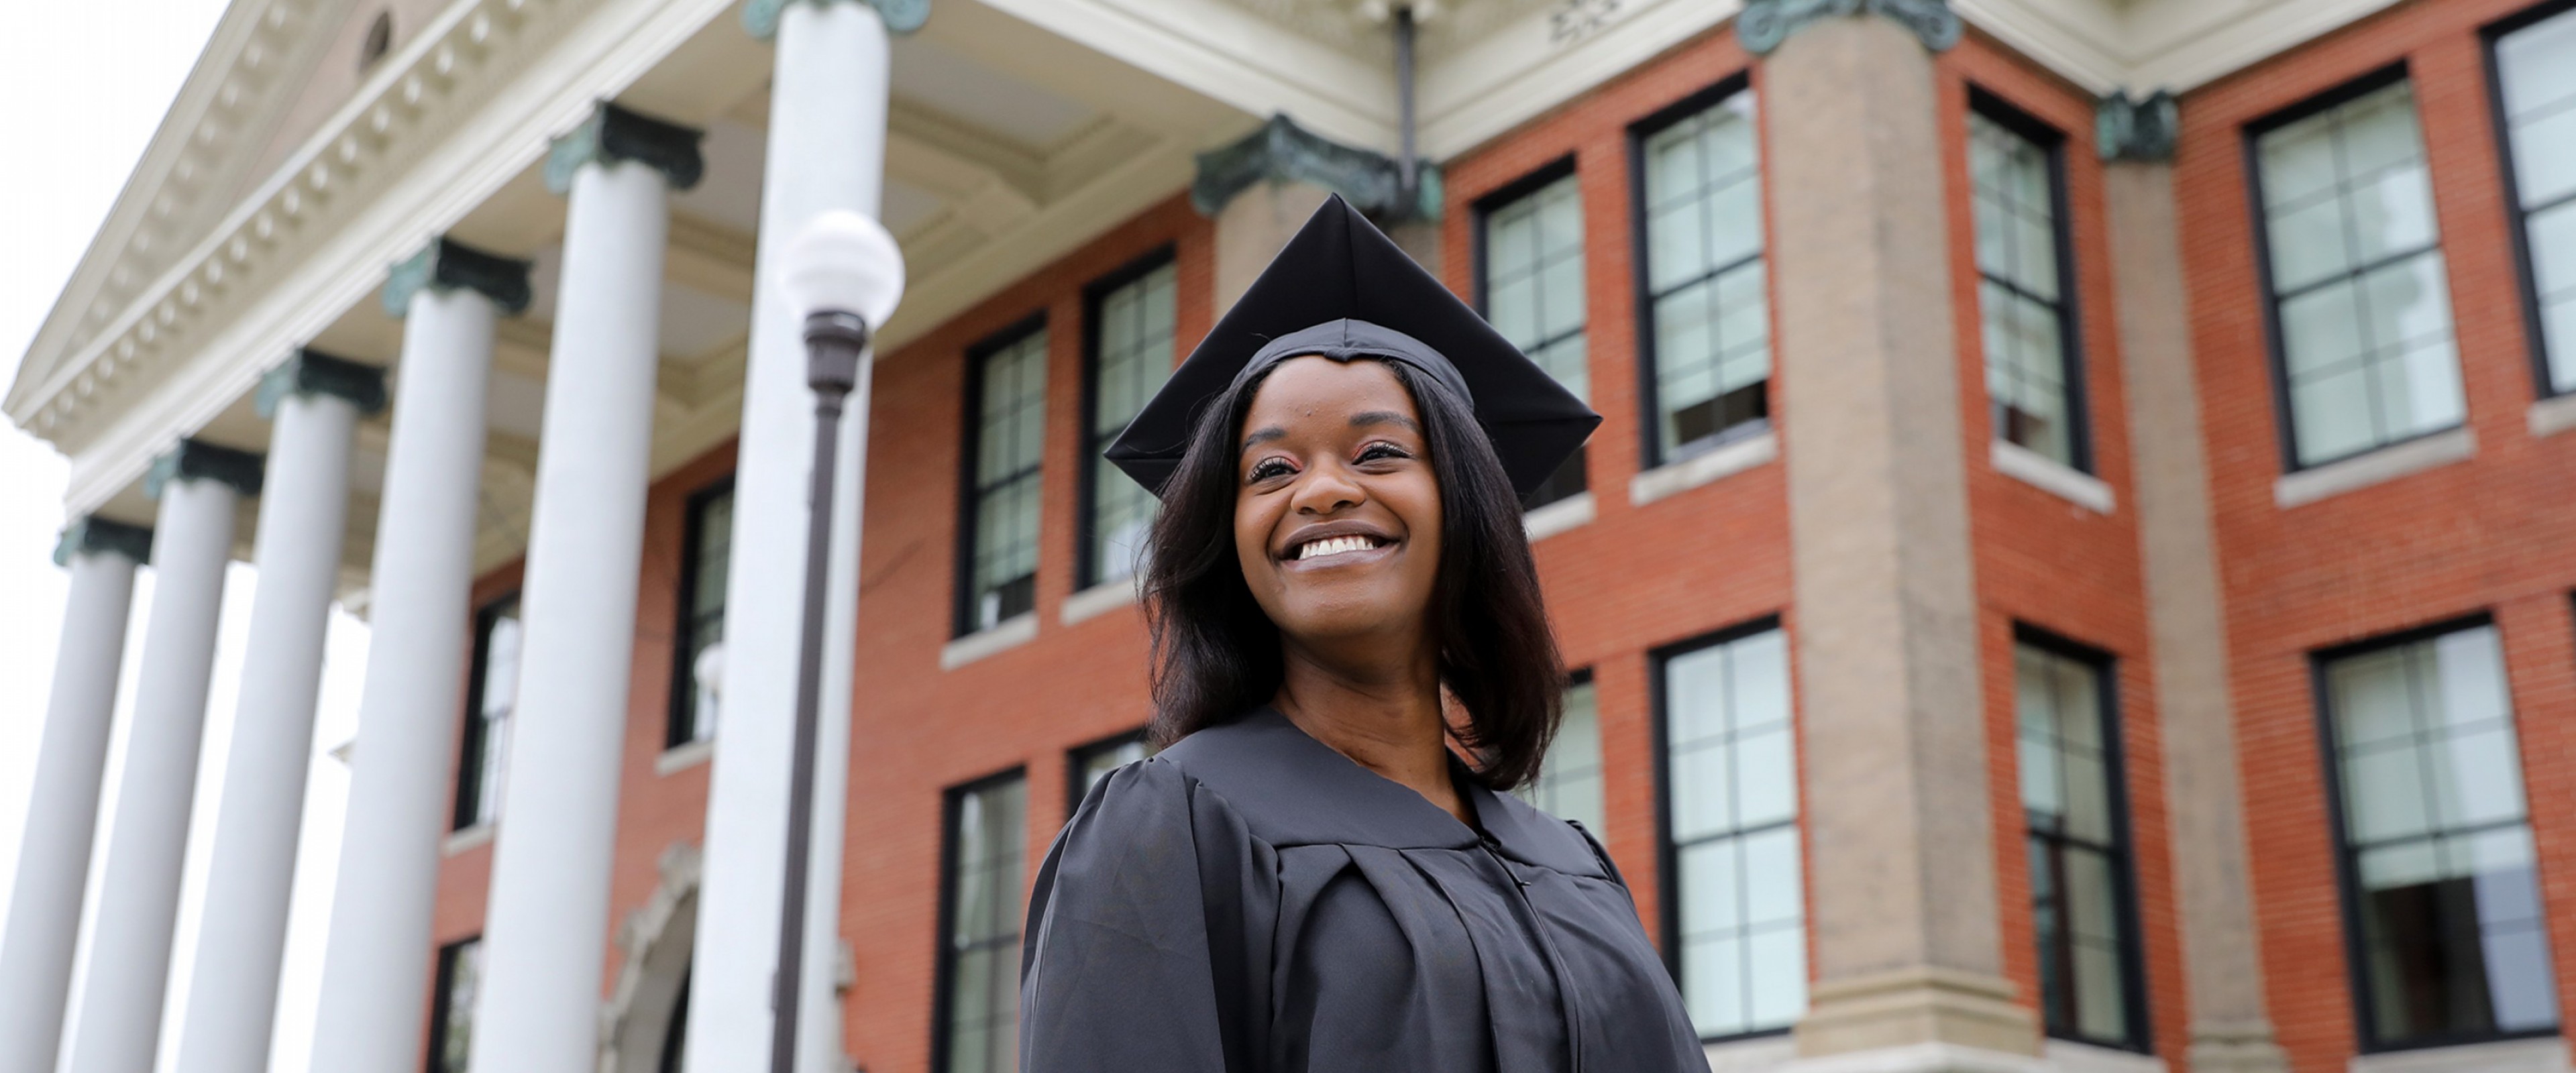 A smiling WMU graduate wearing her cap and gown